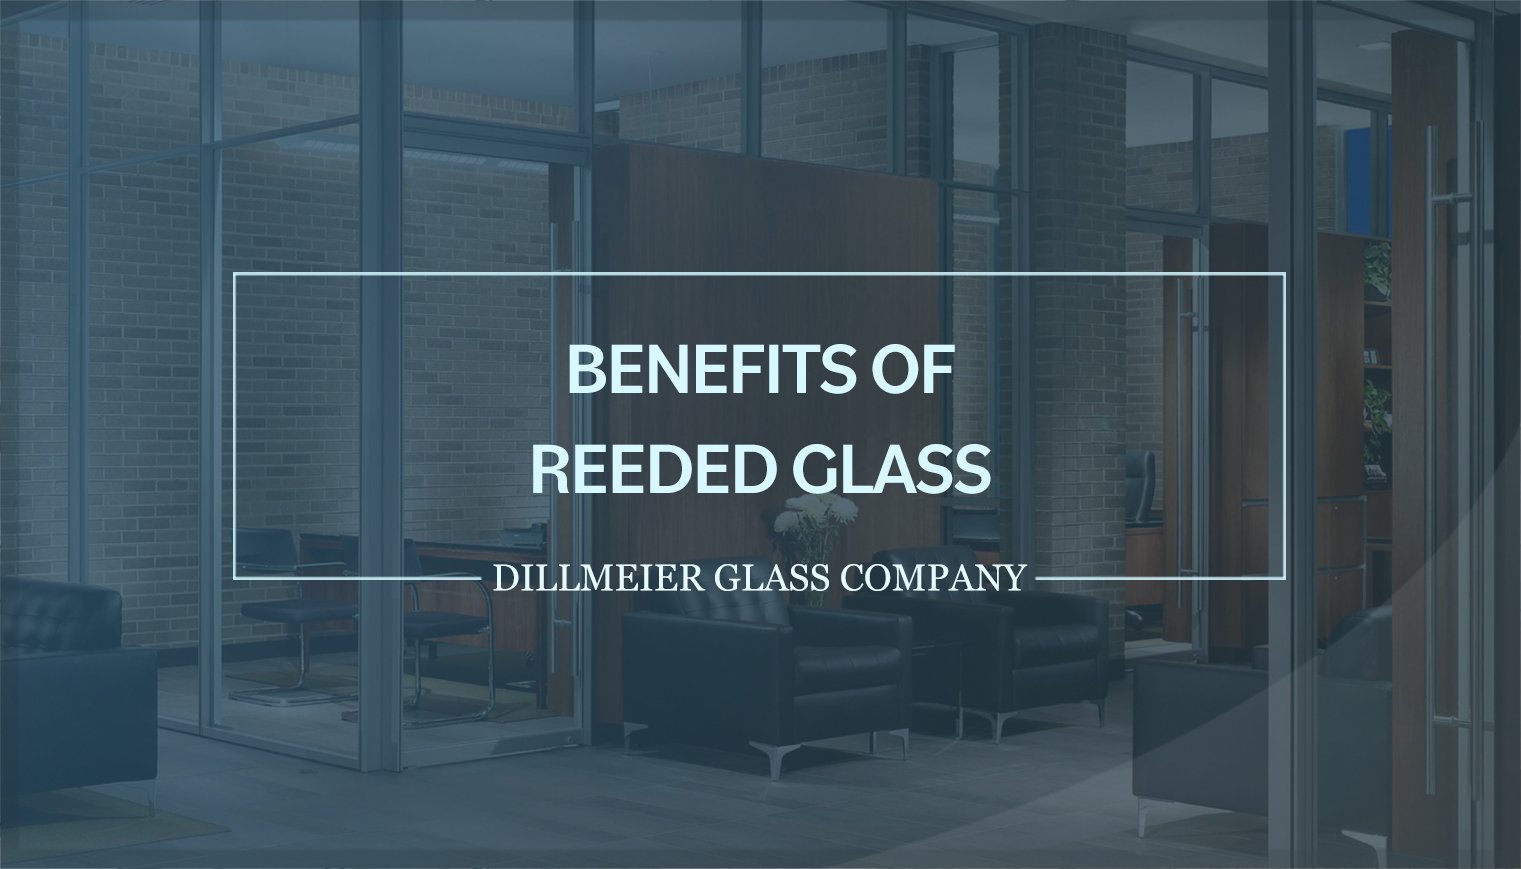 Benefits of Reeded Glass